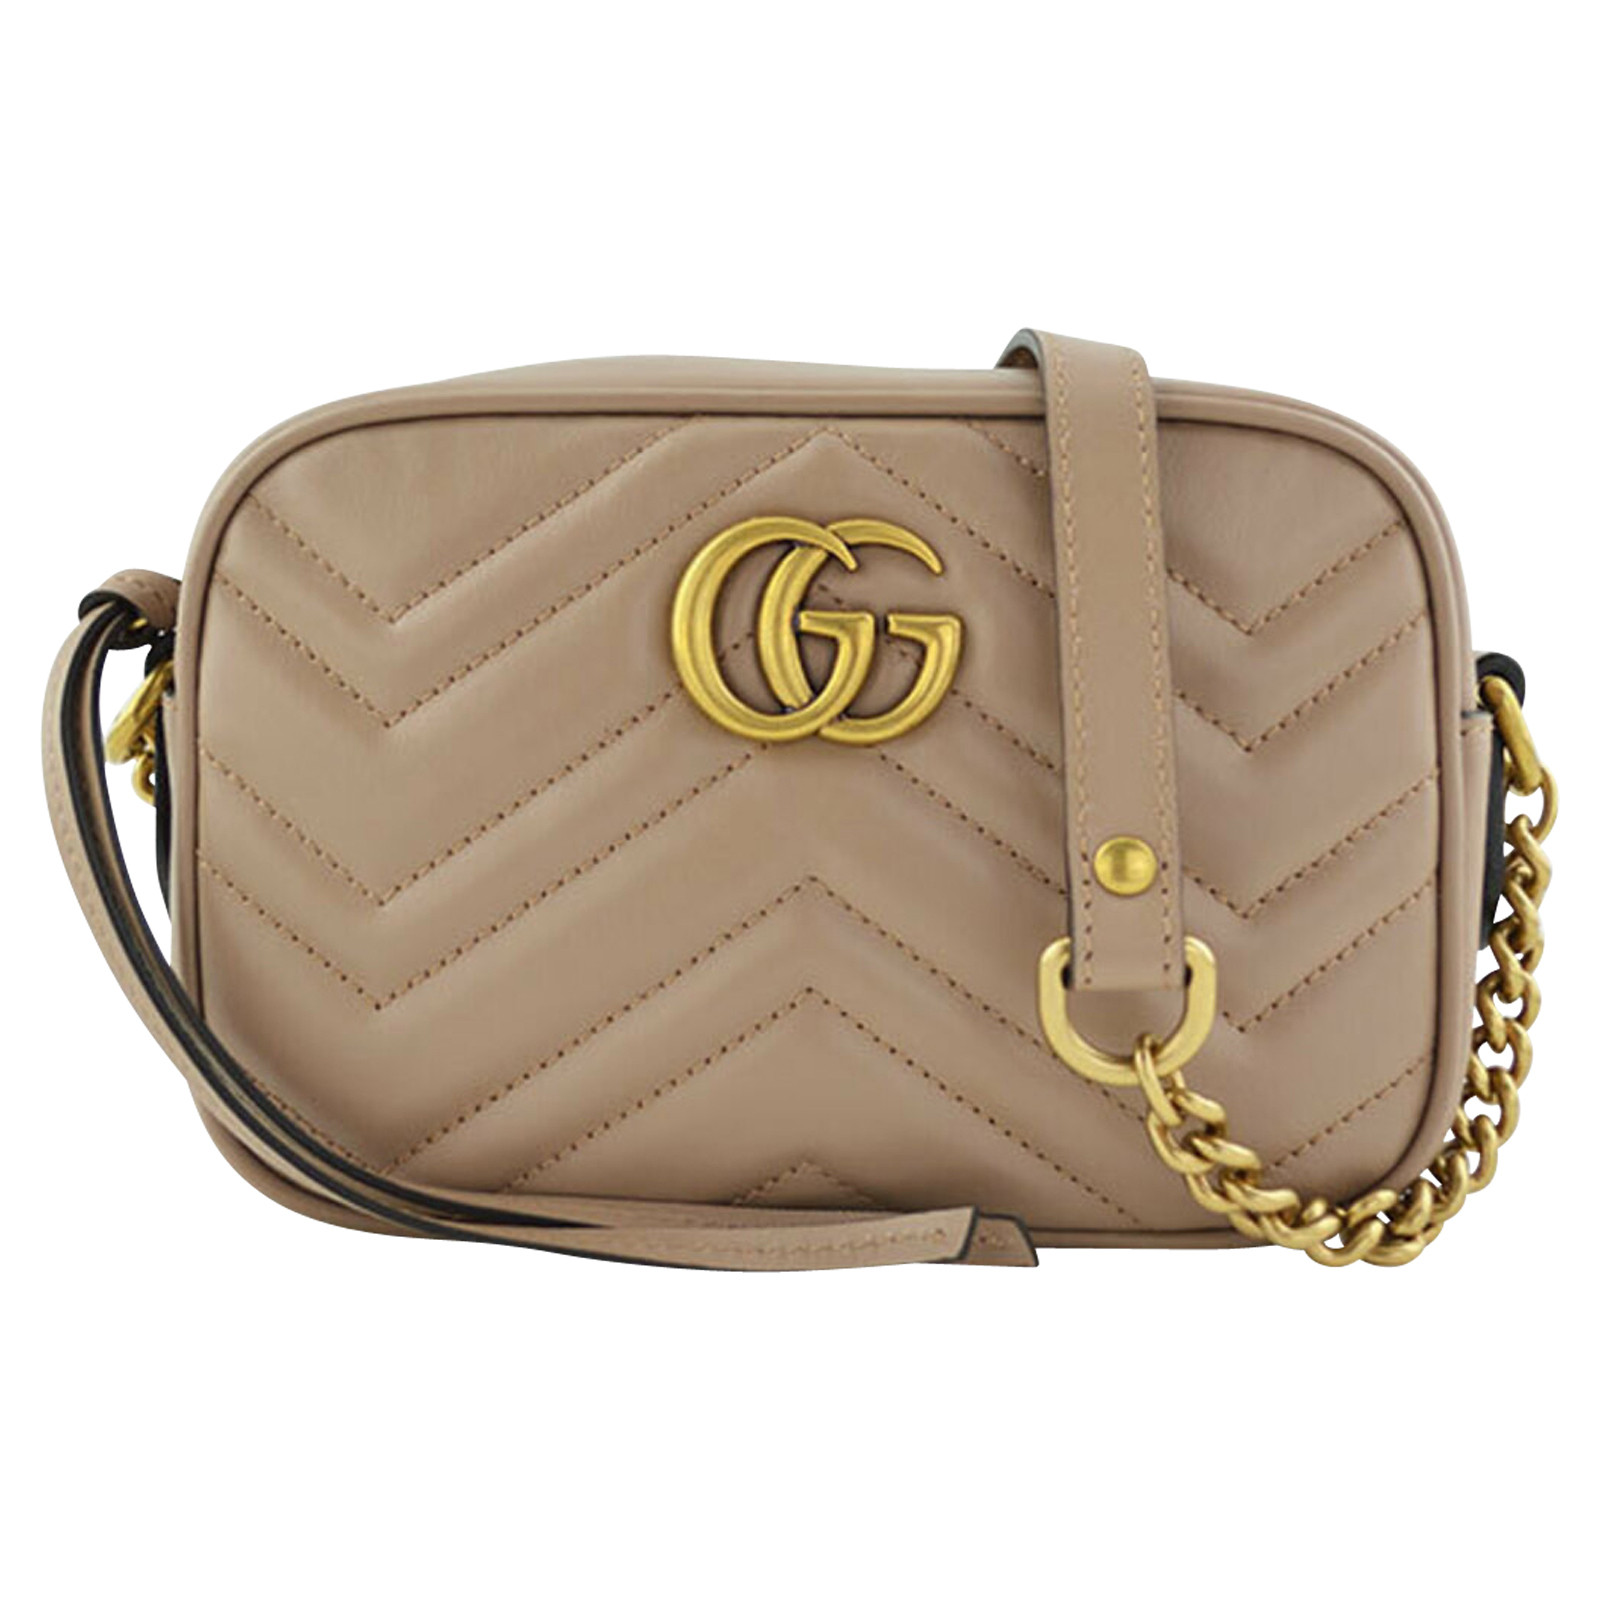 Marmont Camera Bag Leather in Nude - Second Hand Gucci Marmont Camera Bag Leather in Nude used for (4963345)